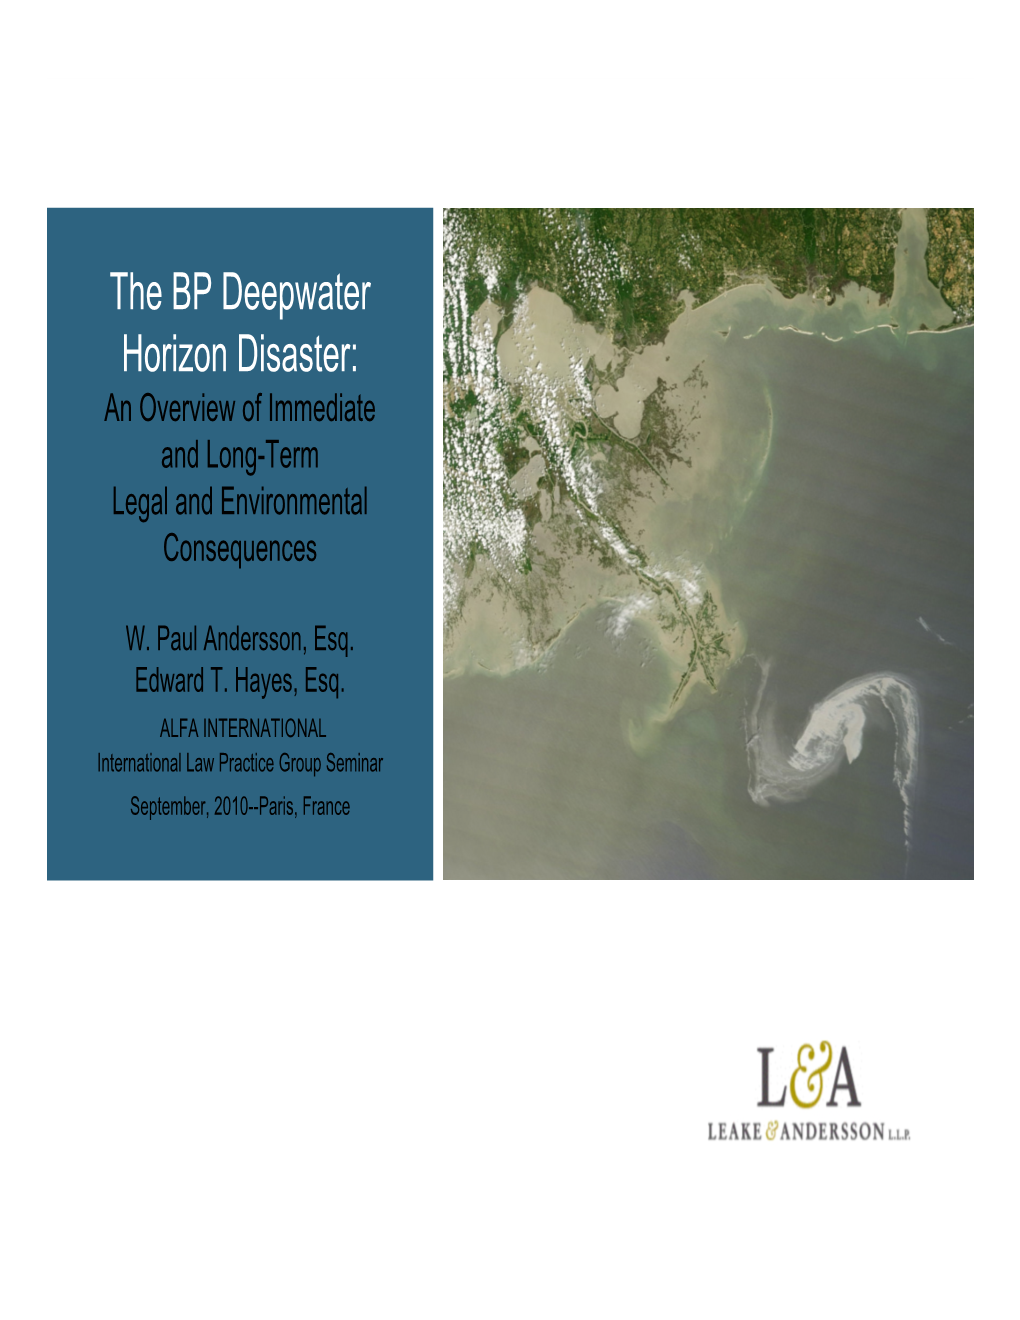 The BP Deepwater Horizon Disaster: an Overview of Immediate and Long-Term Legal and Environmental Consequences